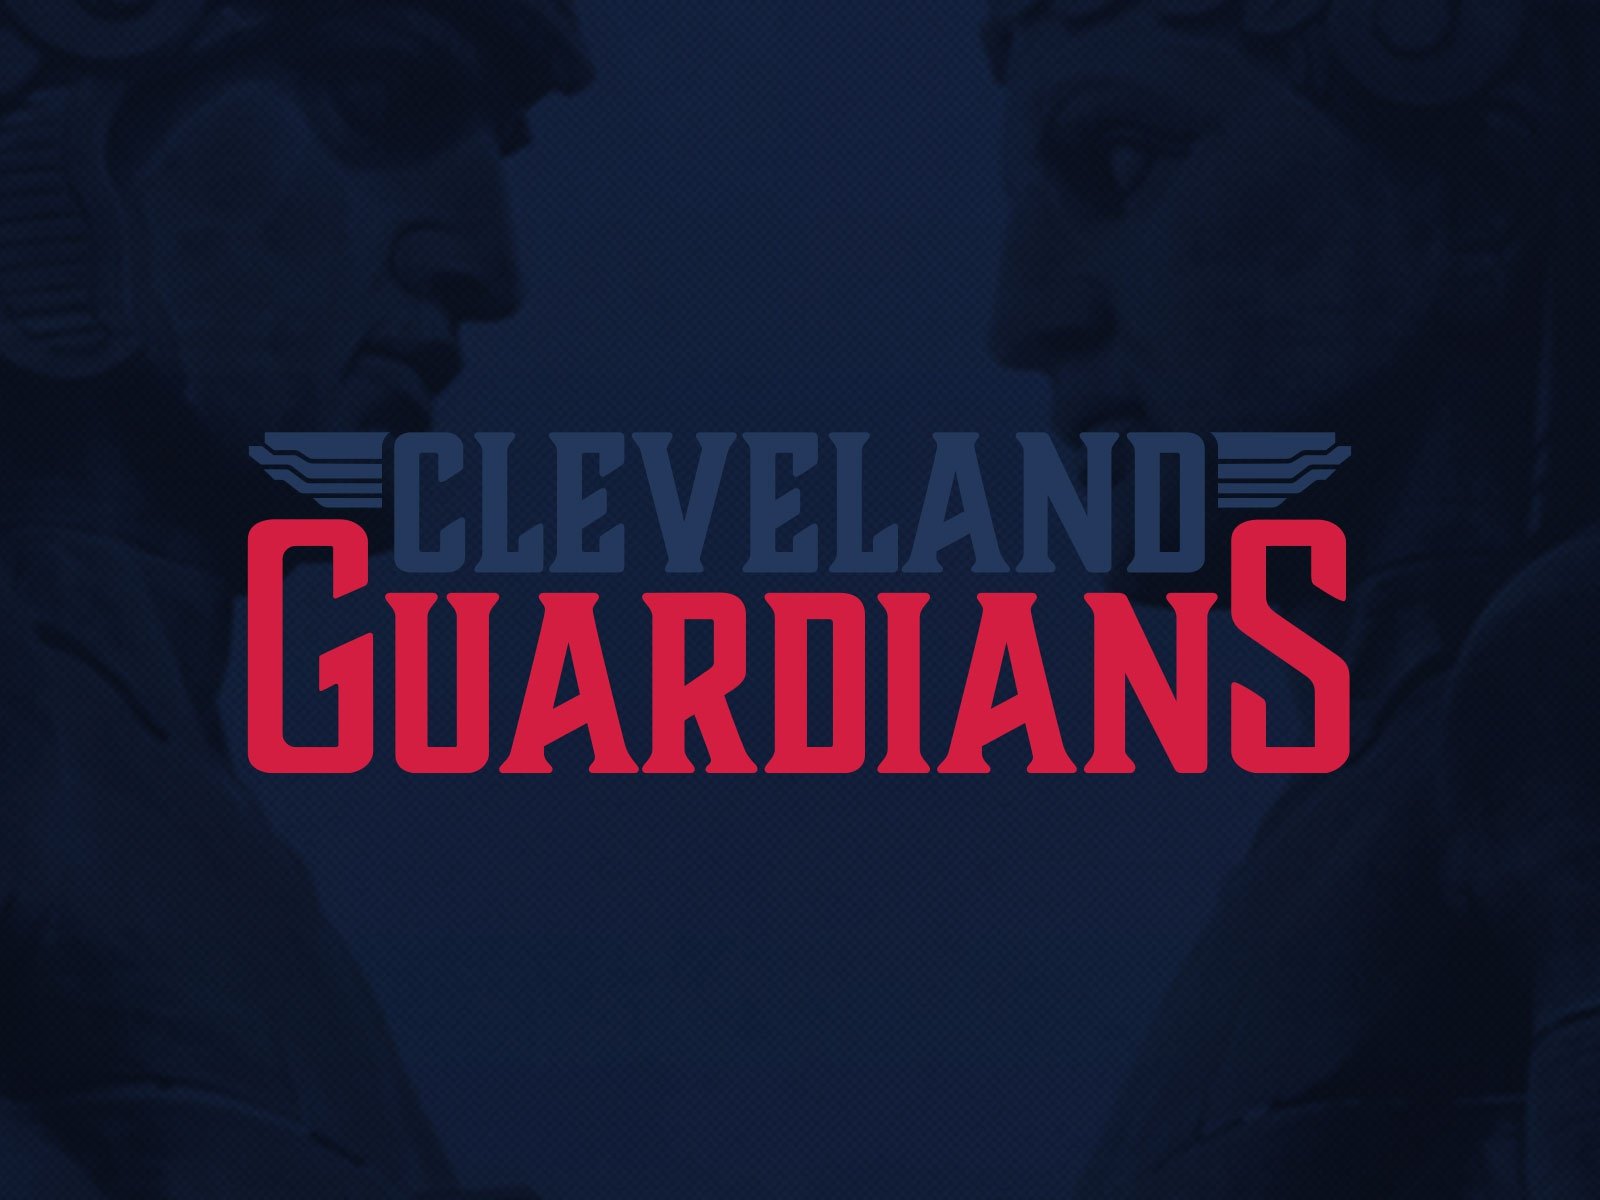 Cleveland Guardians on Twitter Cant get enough Guardians Save these  wallpapers to show us off even more than you already do  httpstco6rr5qnn4jo  Twitter